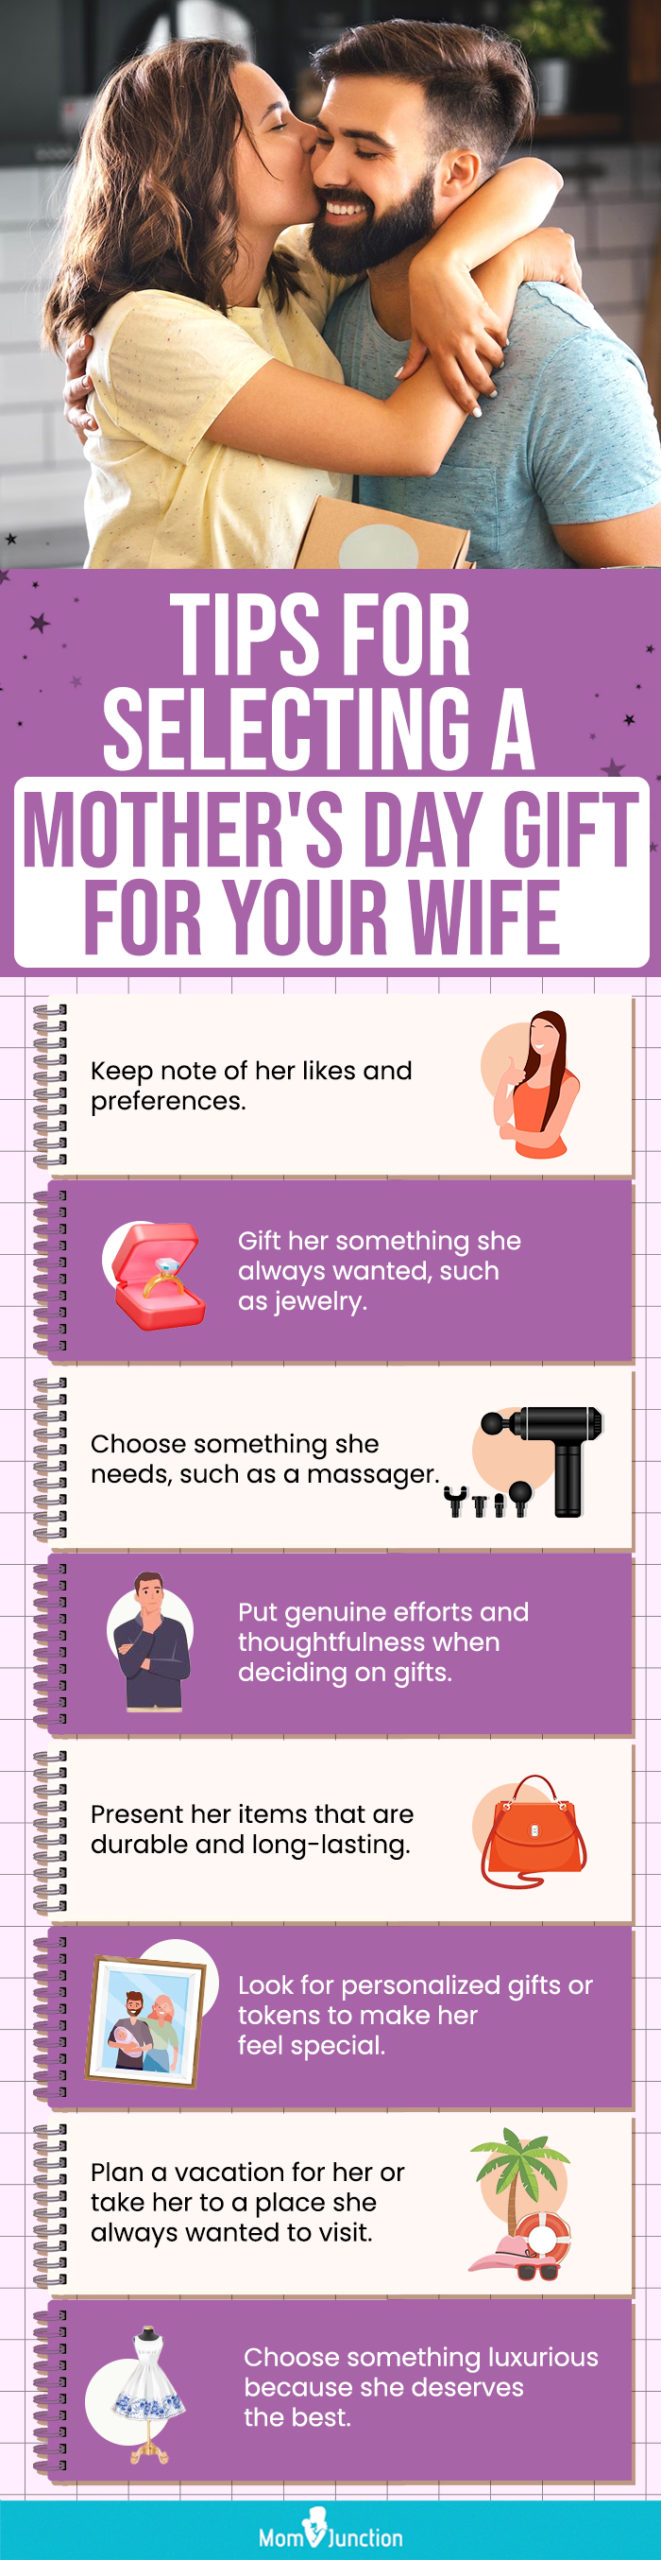 Tips For Selecting A Perfect Mother's Day Gift For Your Wife (infographic)